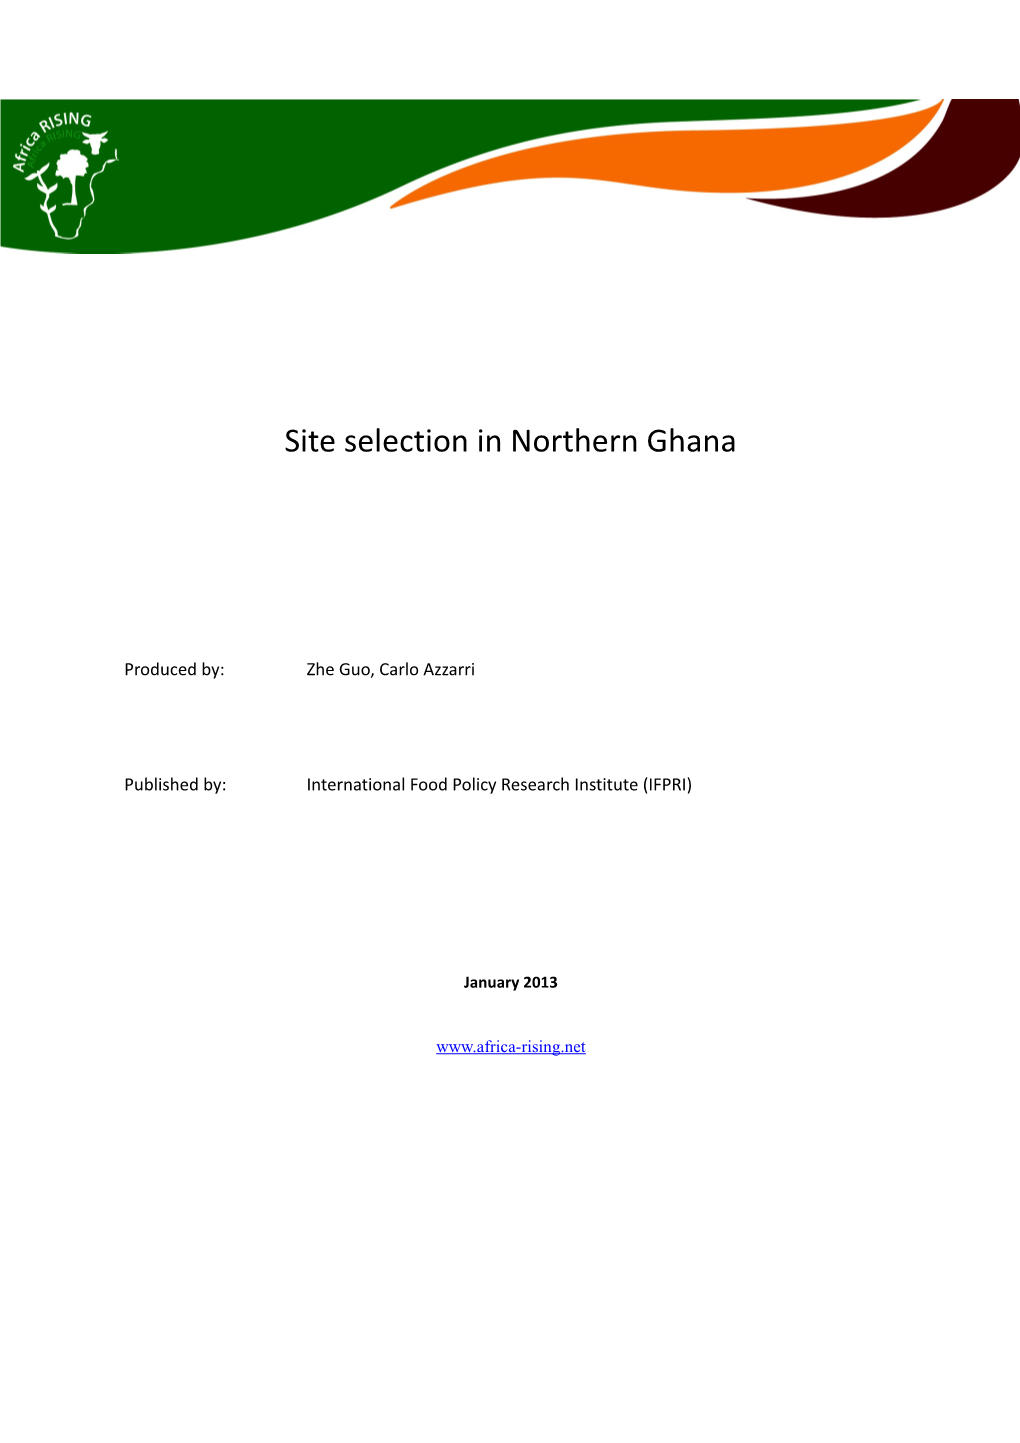 Site Selection in Northern Ghana